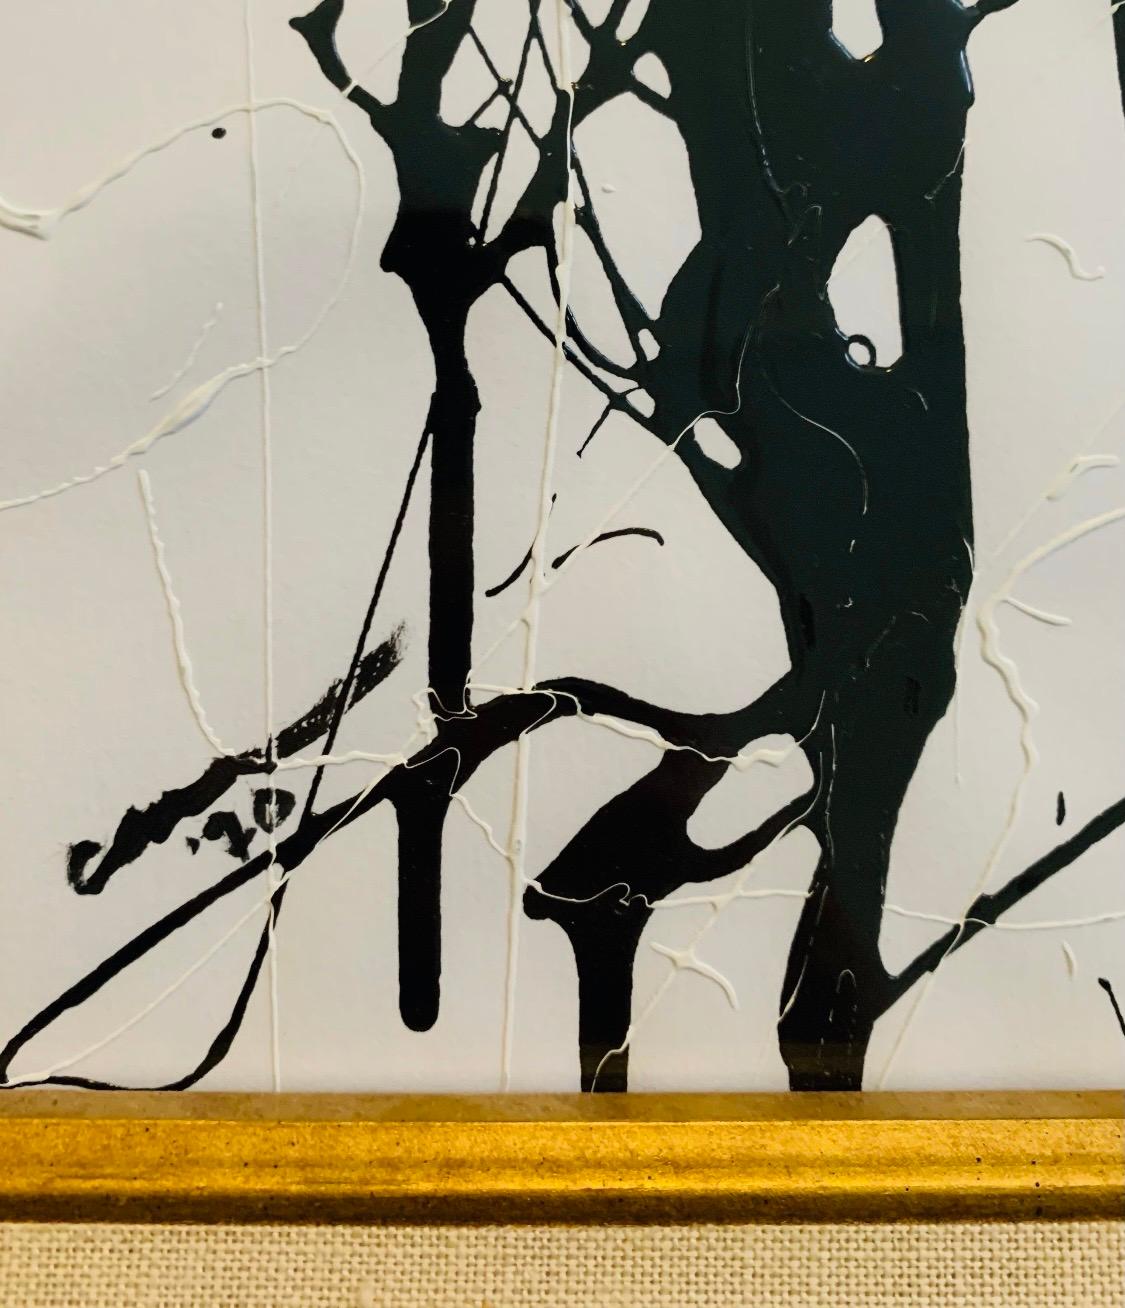 An abstract Expressionist painting utilizing black and white acrylic enamel paint in a gestural manner creating a dynamic downward movement of the paint. Signed lower left Carri, 1970 and displayed under glass in a newer gold giltwood frame.